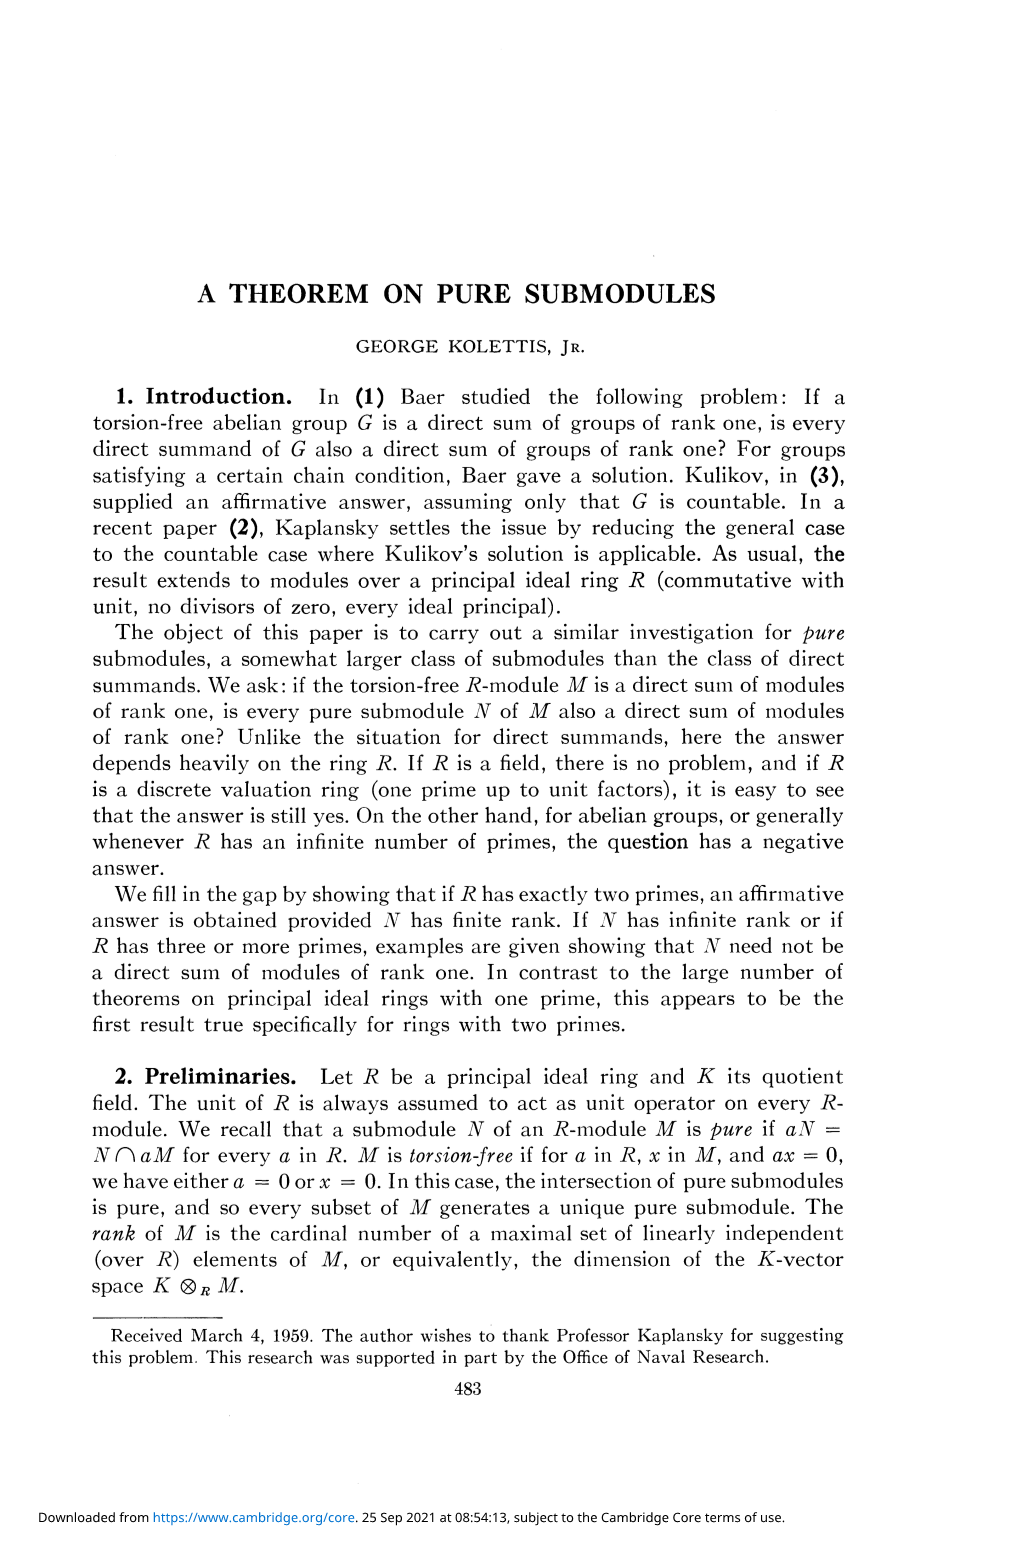 A Theorem on Pure Submodules